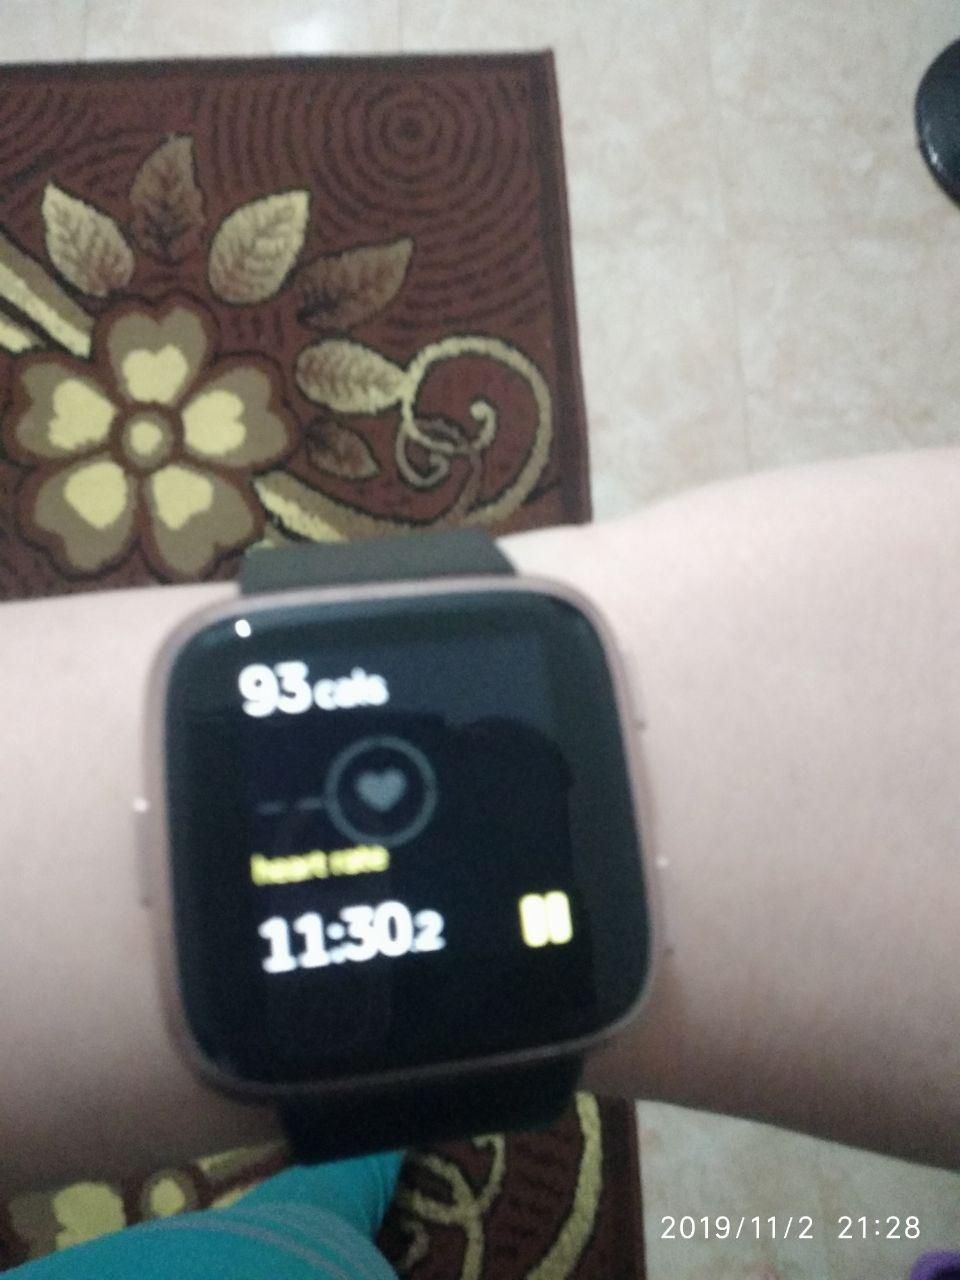 fitbit os 4.0